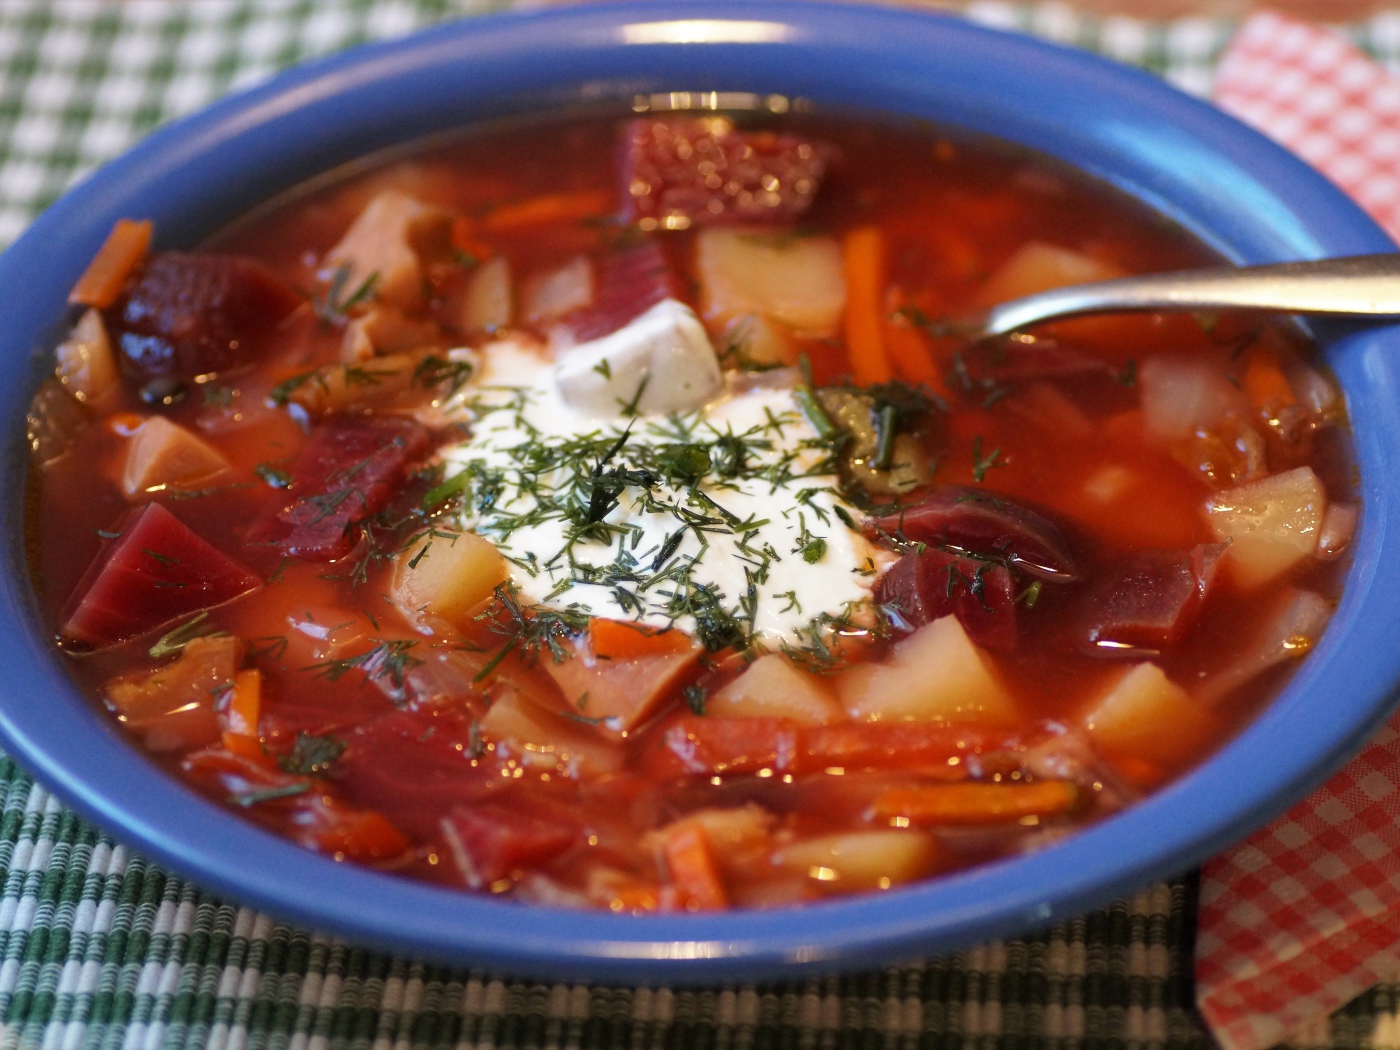 Borscht with sour cream in a blue bowl on the table